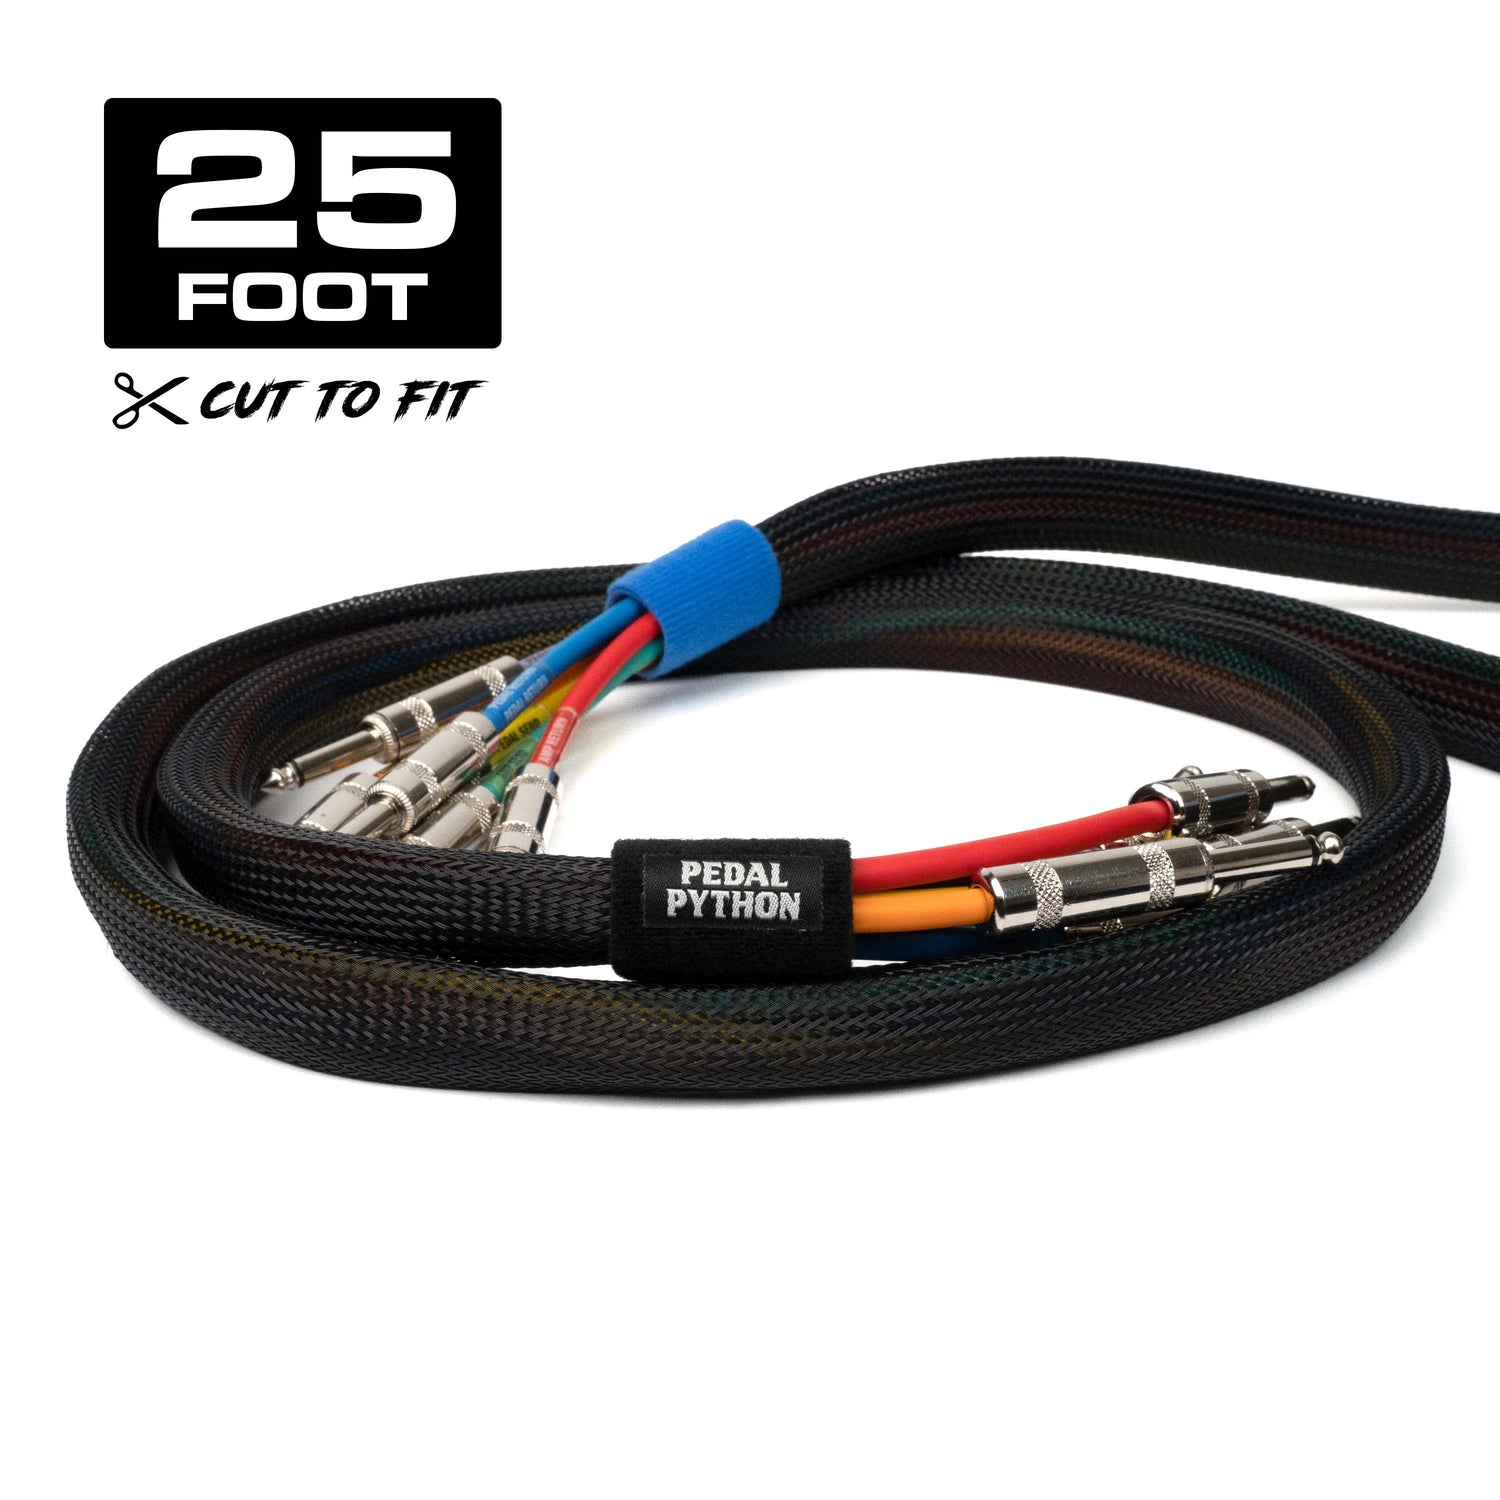 Pedal Python™ Cable Snake Management System